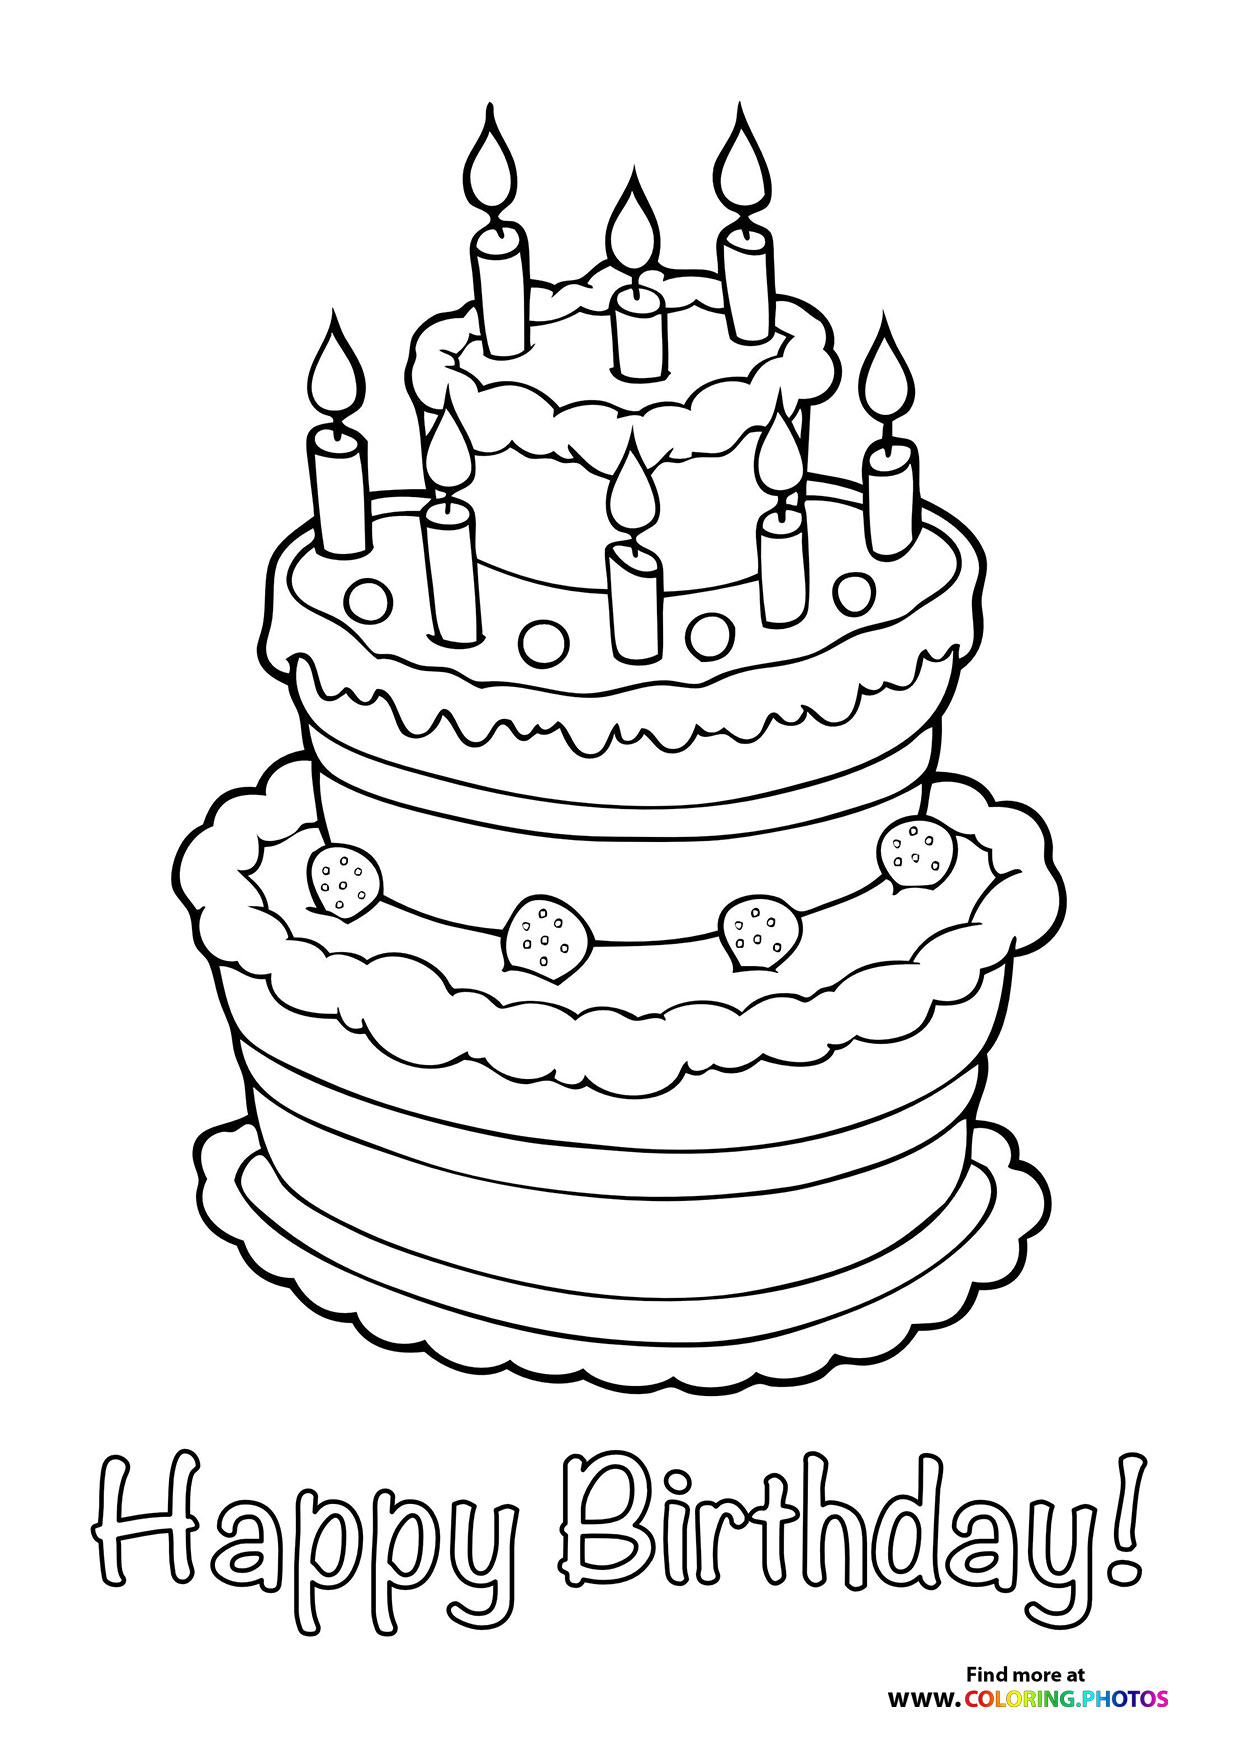 Happy birthday cake - Coloring Pages for kids